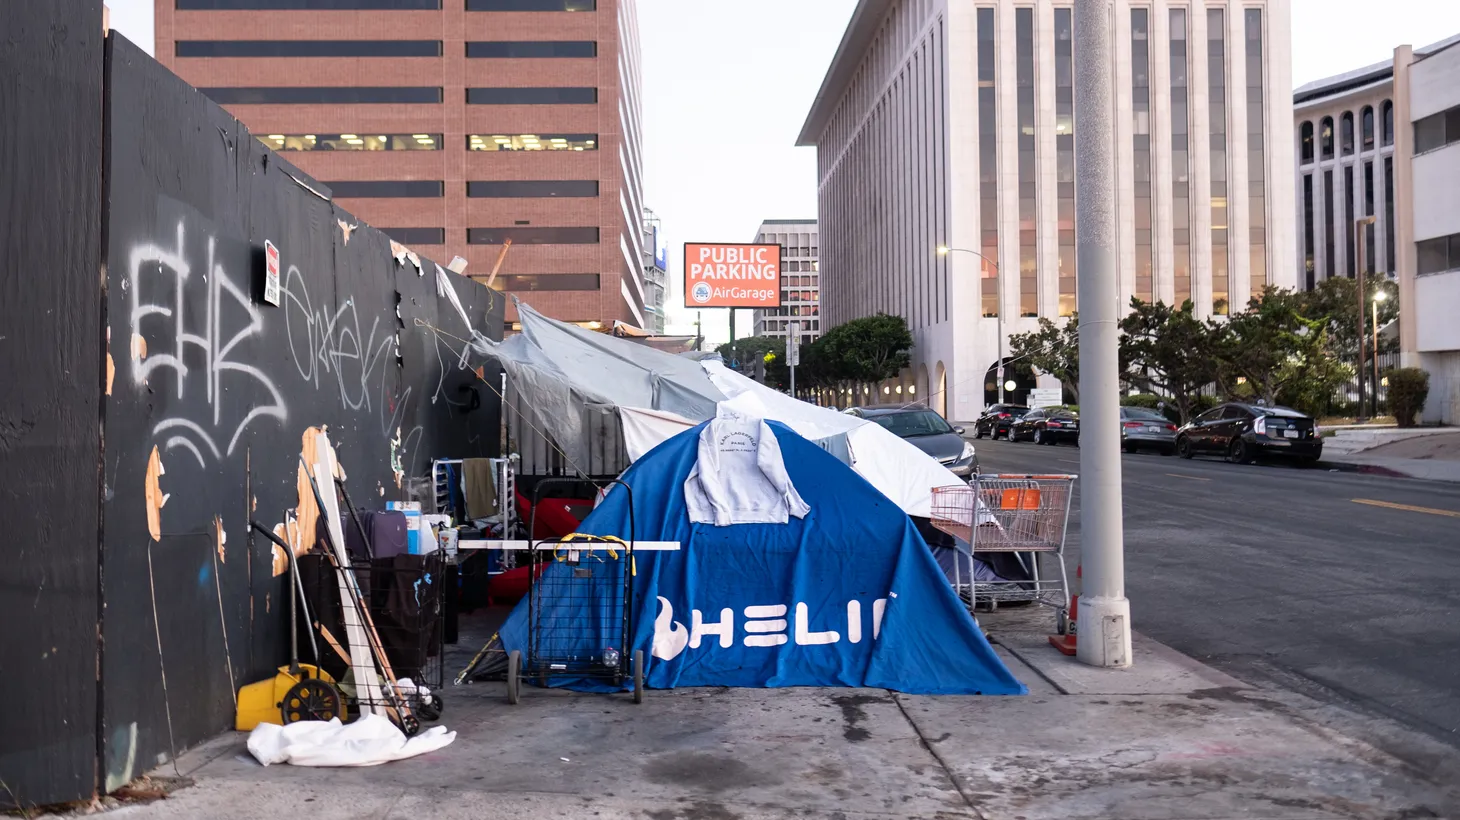 A homeless encampment is seen in Koreatown, September 5, 2021. Eric Garcetti said this summer that “the mayor of LA is not some all-powerful being” when it comes to solving homelessness.